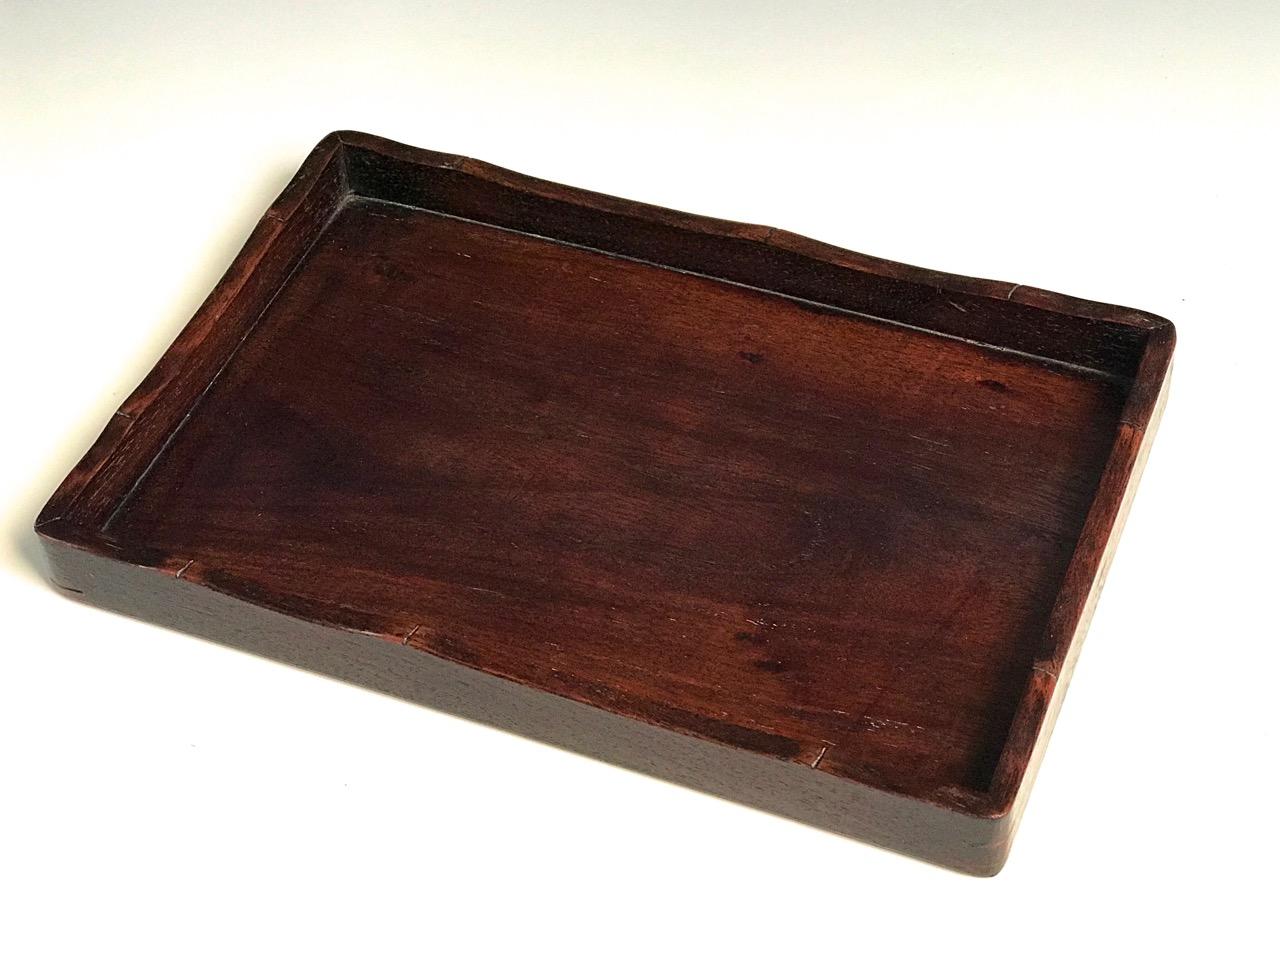 Japanese rosewood tray in the Chinese style, with a center floating panel tongued into the simple rounded corner gallery frame with curved contour detail, resembling the edge of bamboo having mortised joints.
Condition: Signs of wear, otherwise in